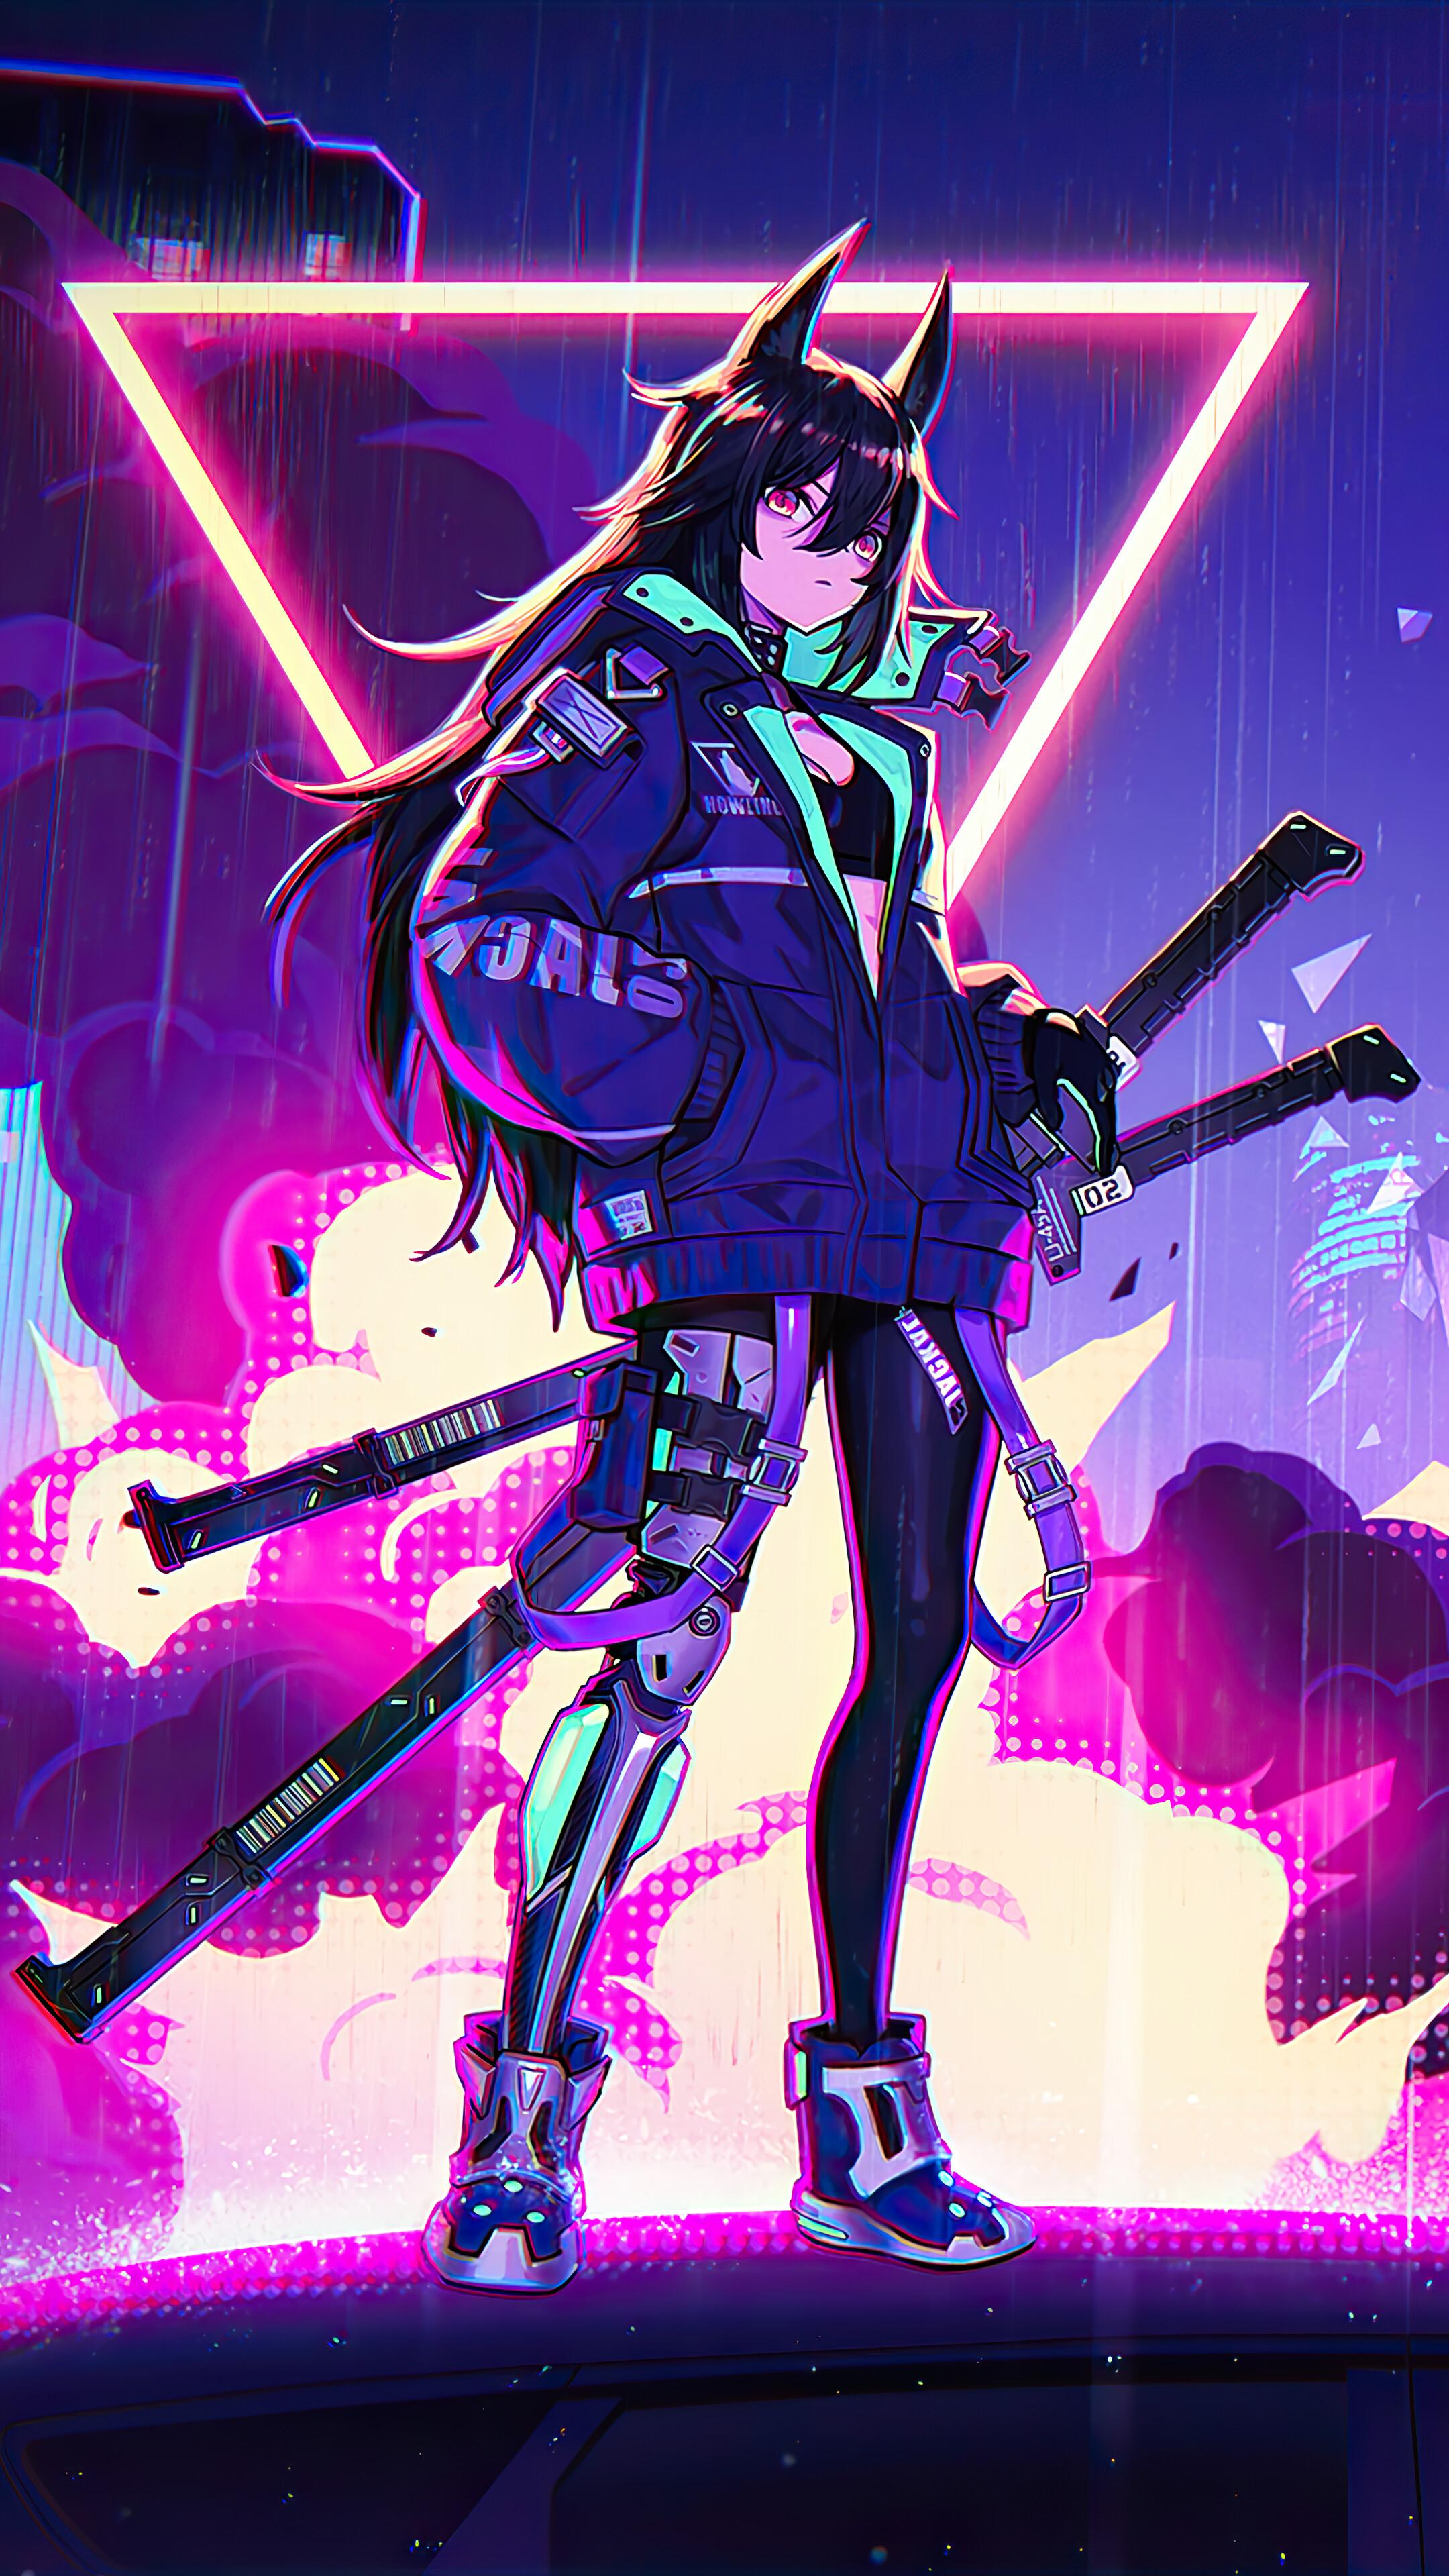 3+ Anime Cyberpunk Wallpapers for iPhone and Android by Julie Watson